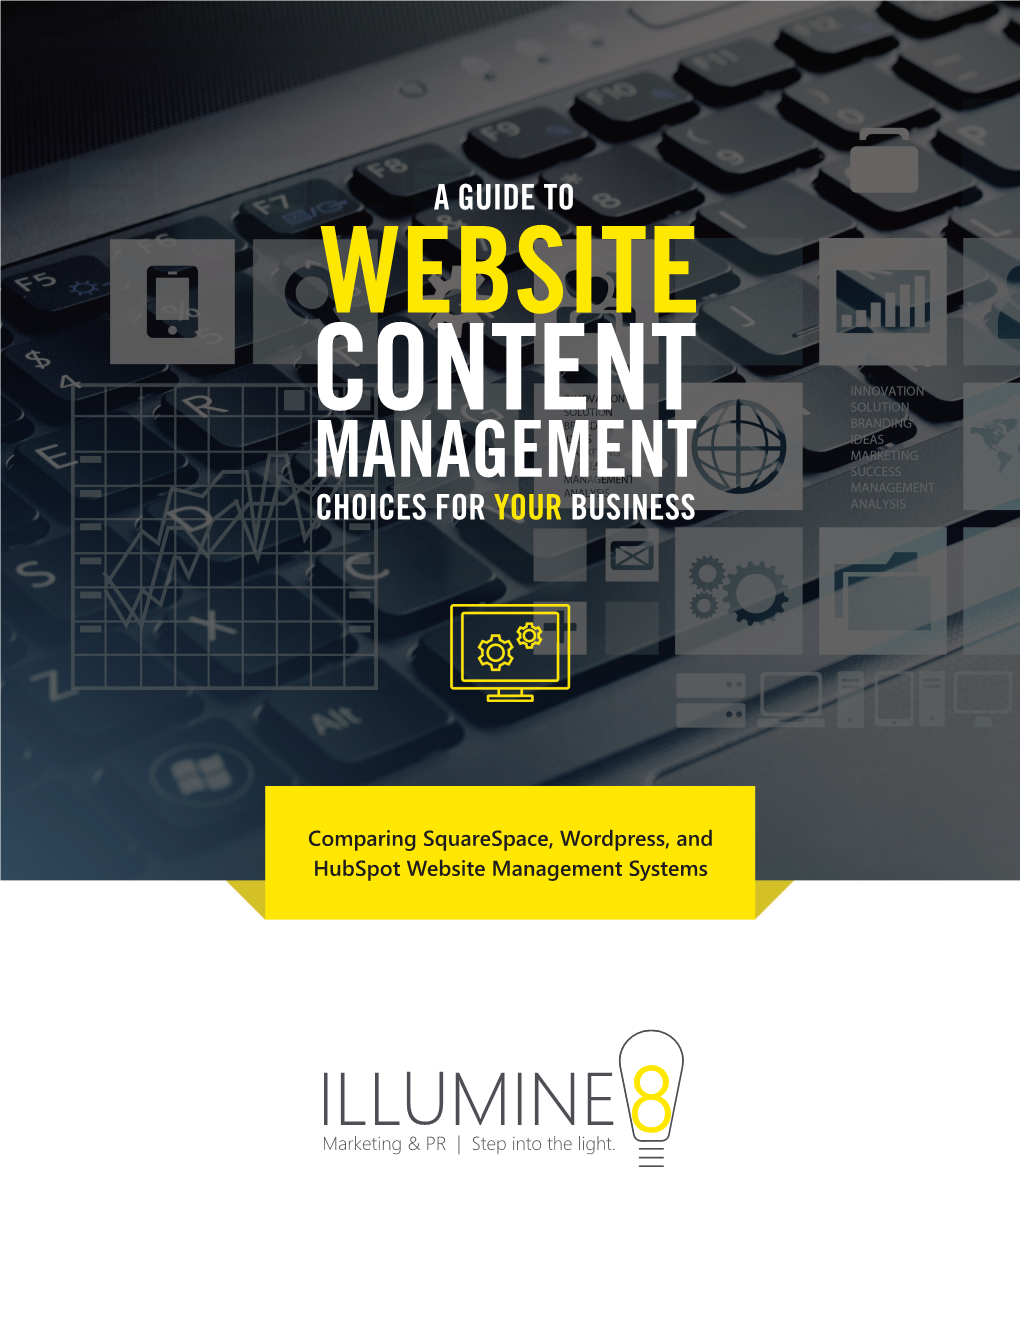 What Is a Website Content Management System?